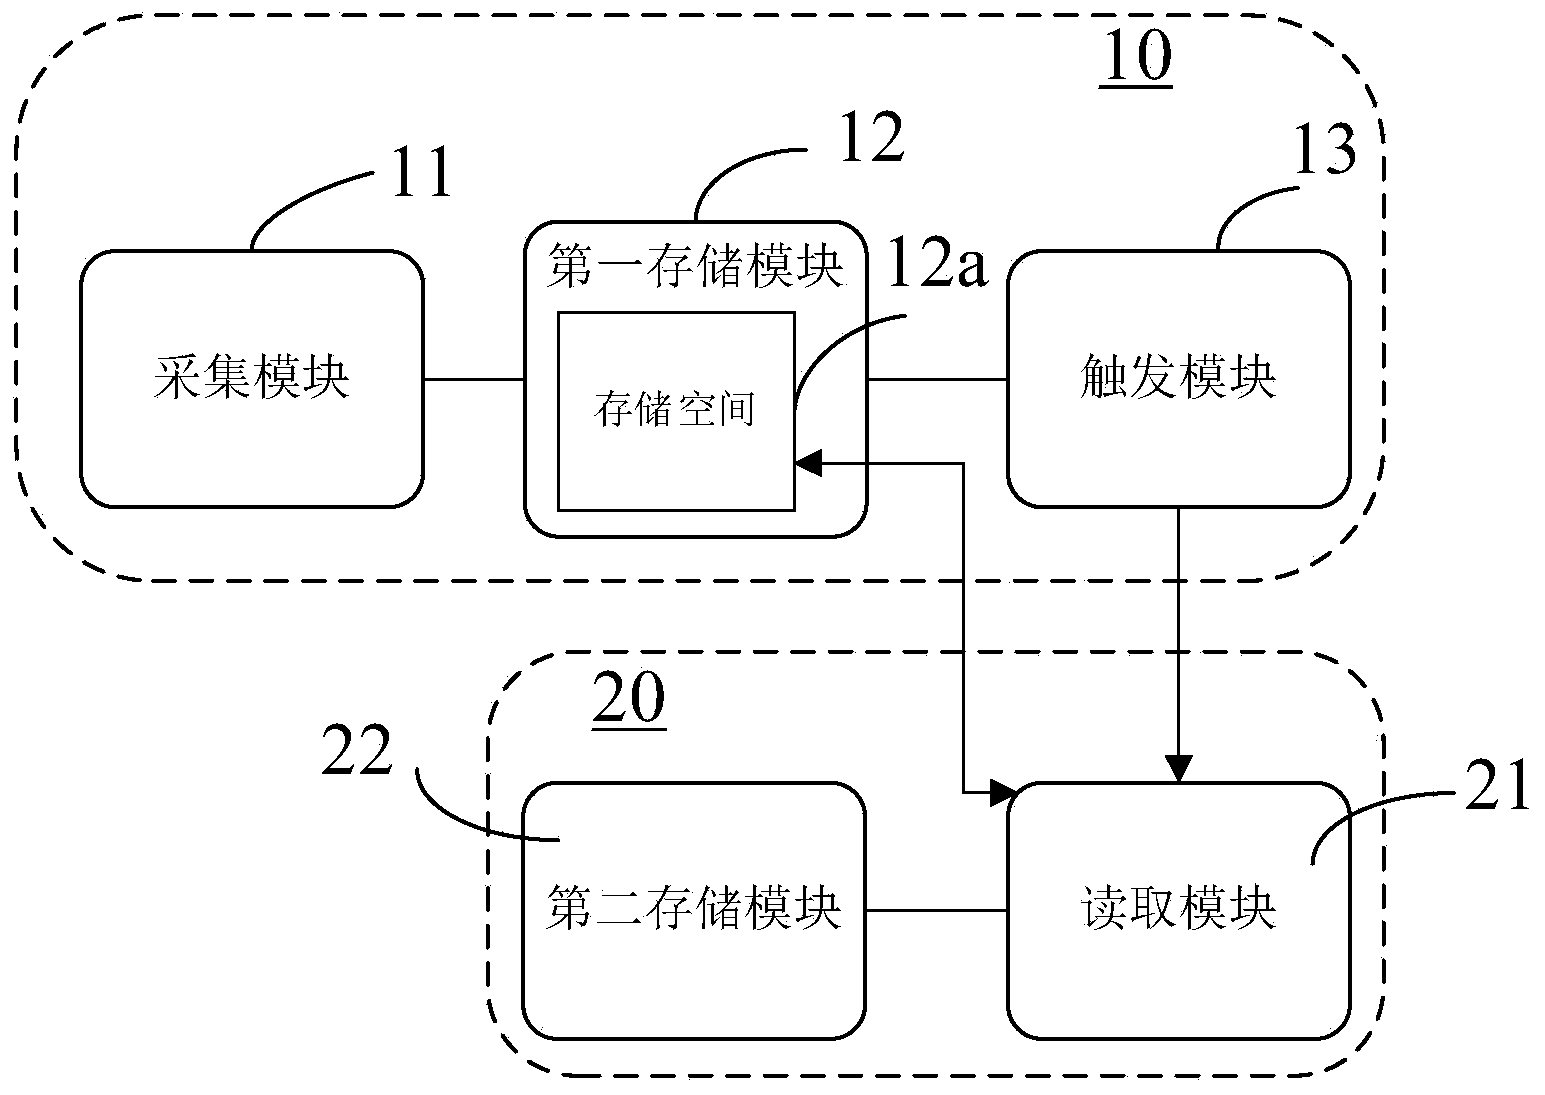 Alarm information storing method and device